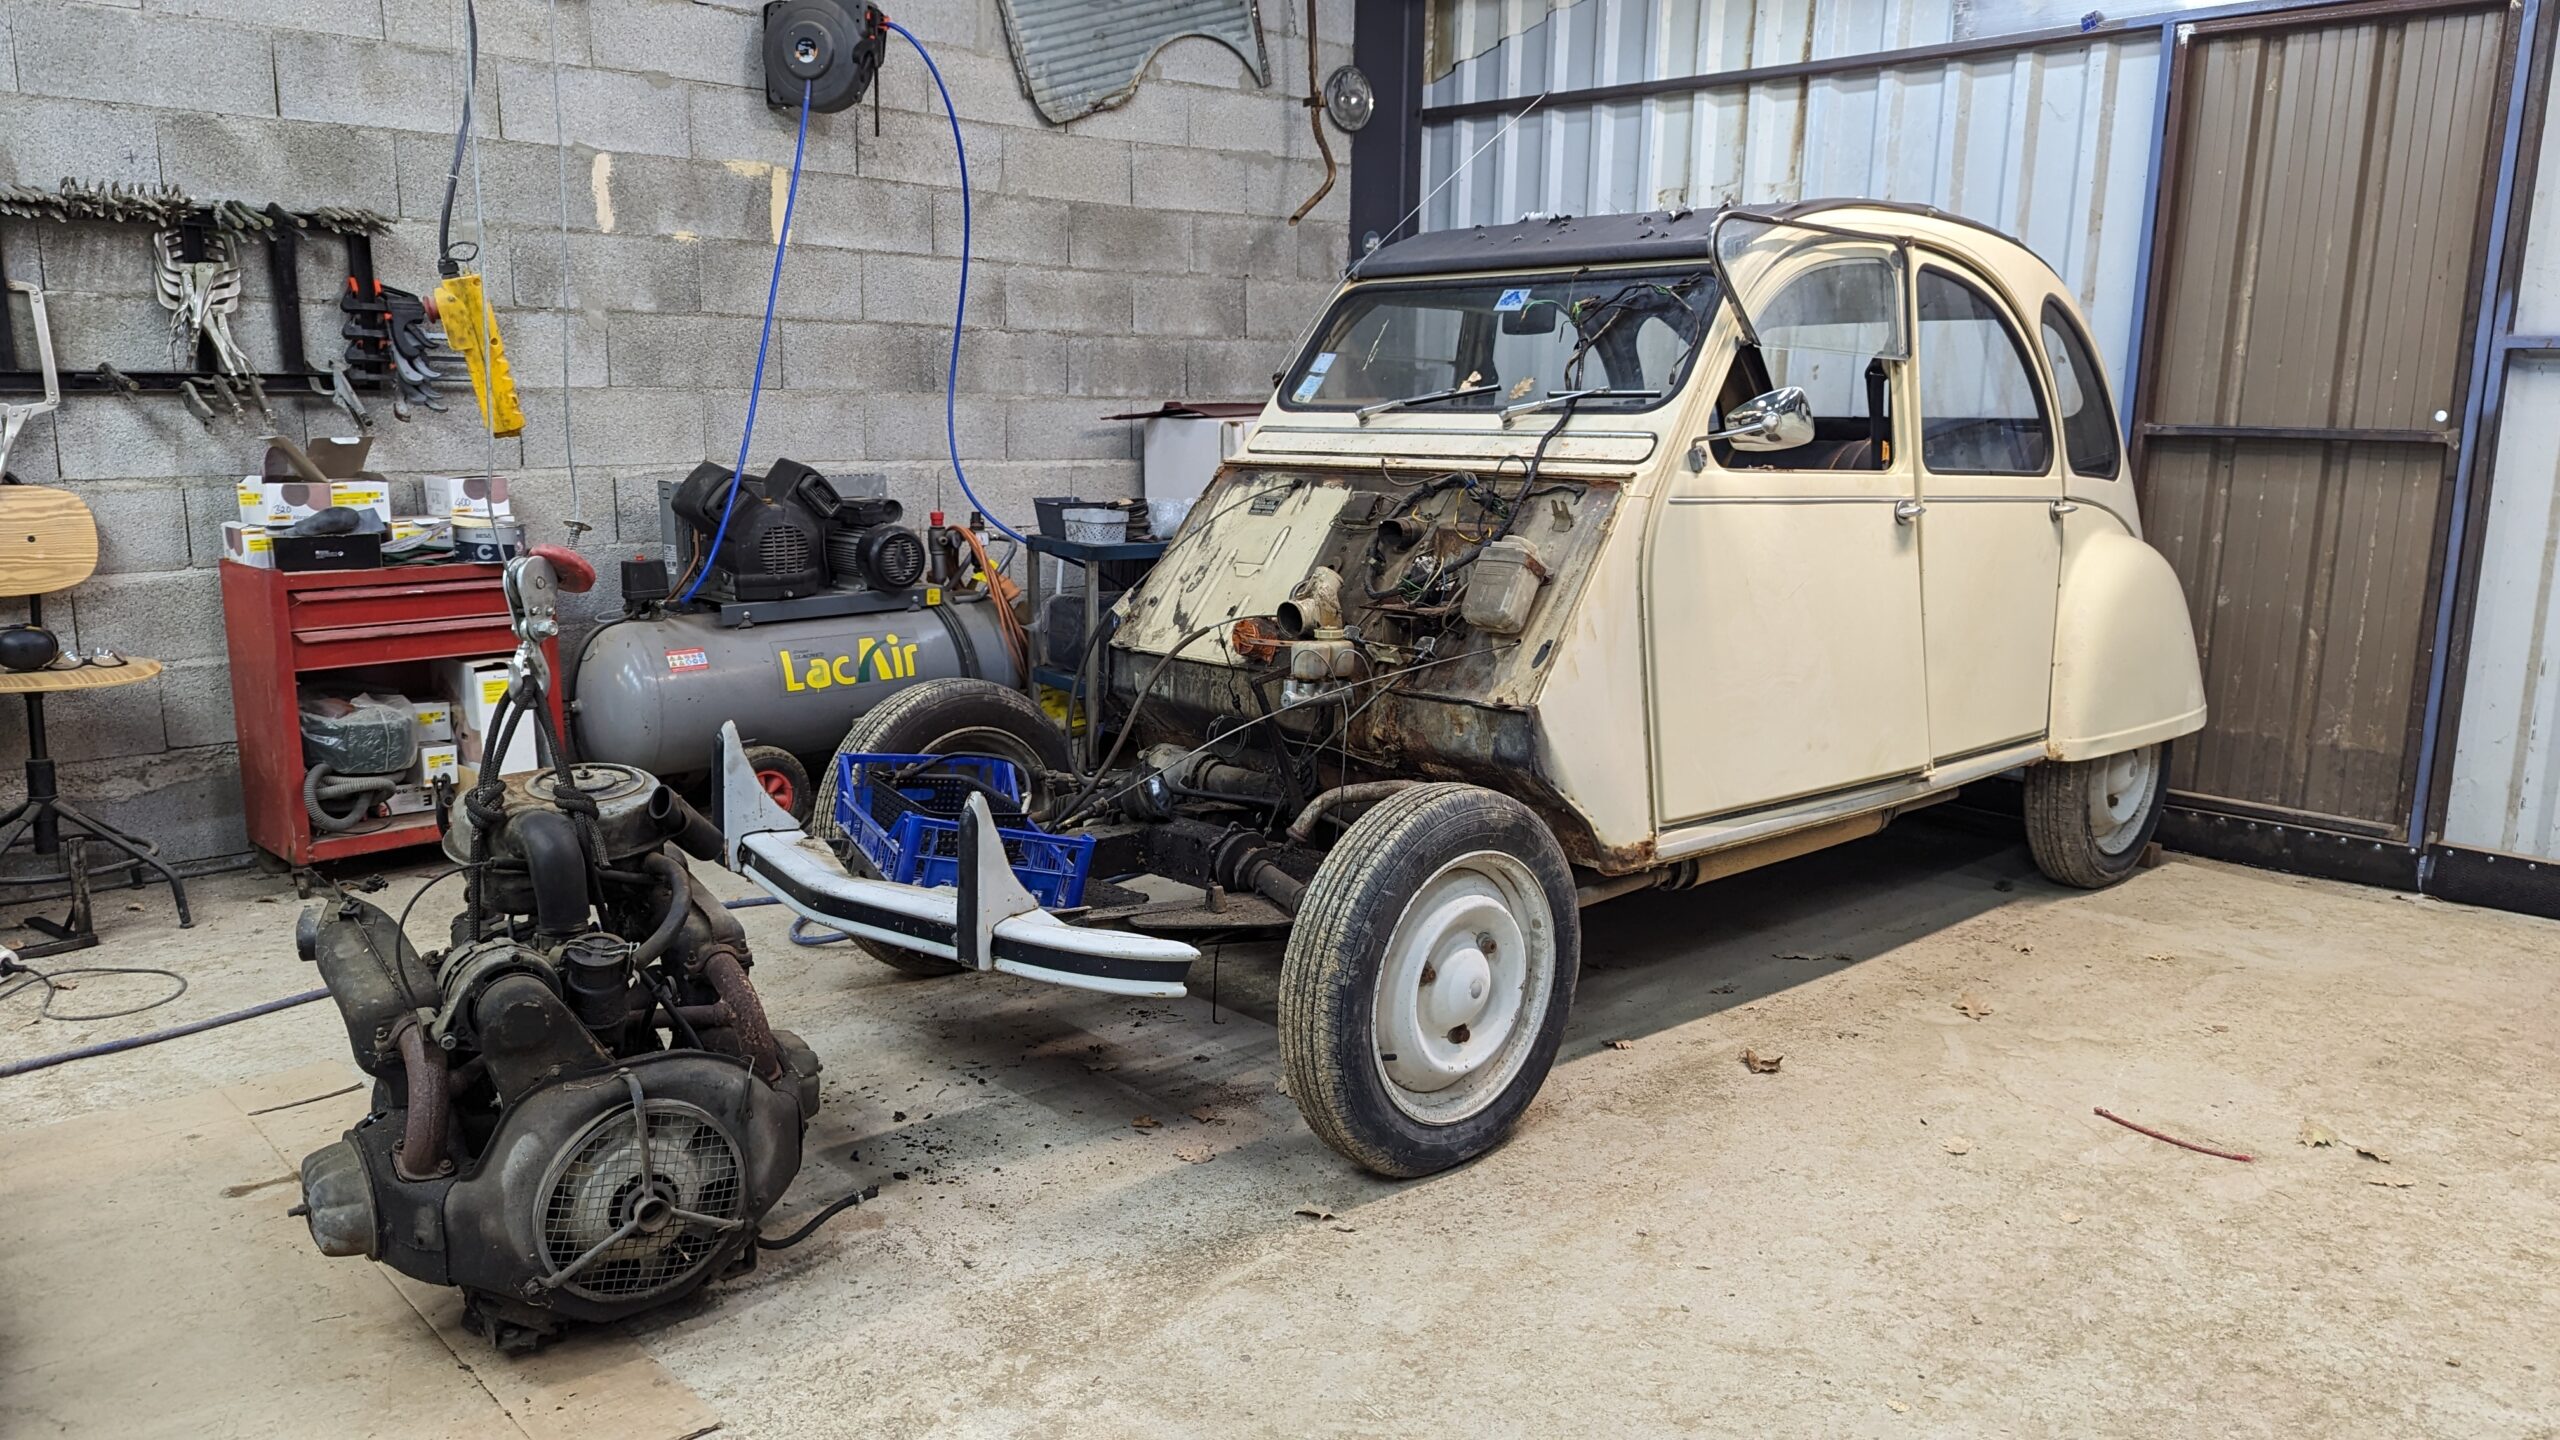 Nearly Four Years Later, I’m Returning the Favour to My 2CV